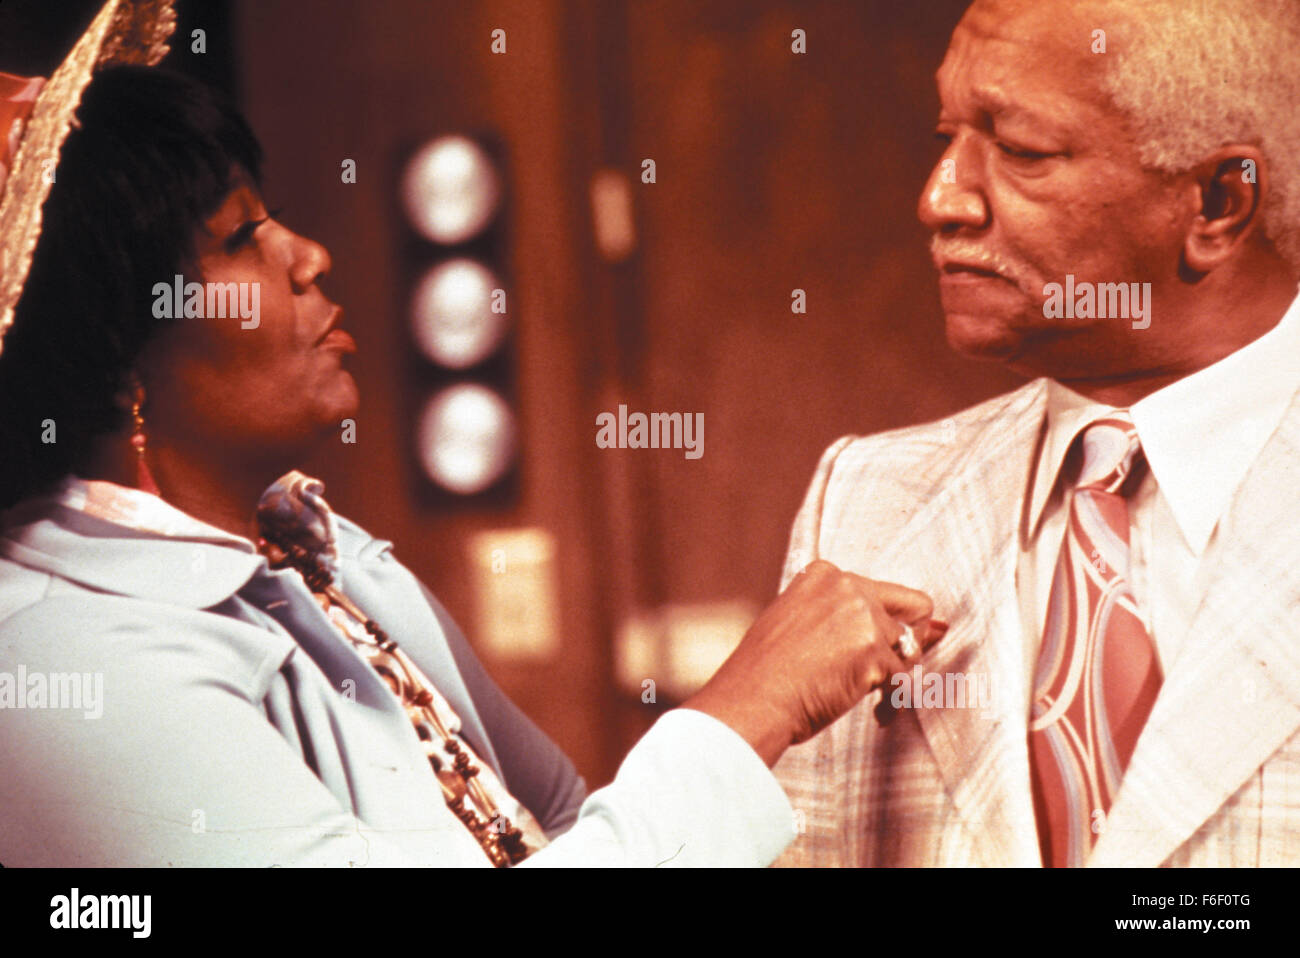 RELEASE DATE: September 29, 1976. MOVIE TITLE: Norman Is That You. STUDIO: Metro-Goldwyn-Mayer (MGM). PLOT: . PICTURED: REDD FOXX as Ben Chambers and PEARL BAILEY as Beatrice Chambers. Stock Photo